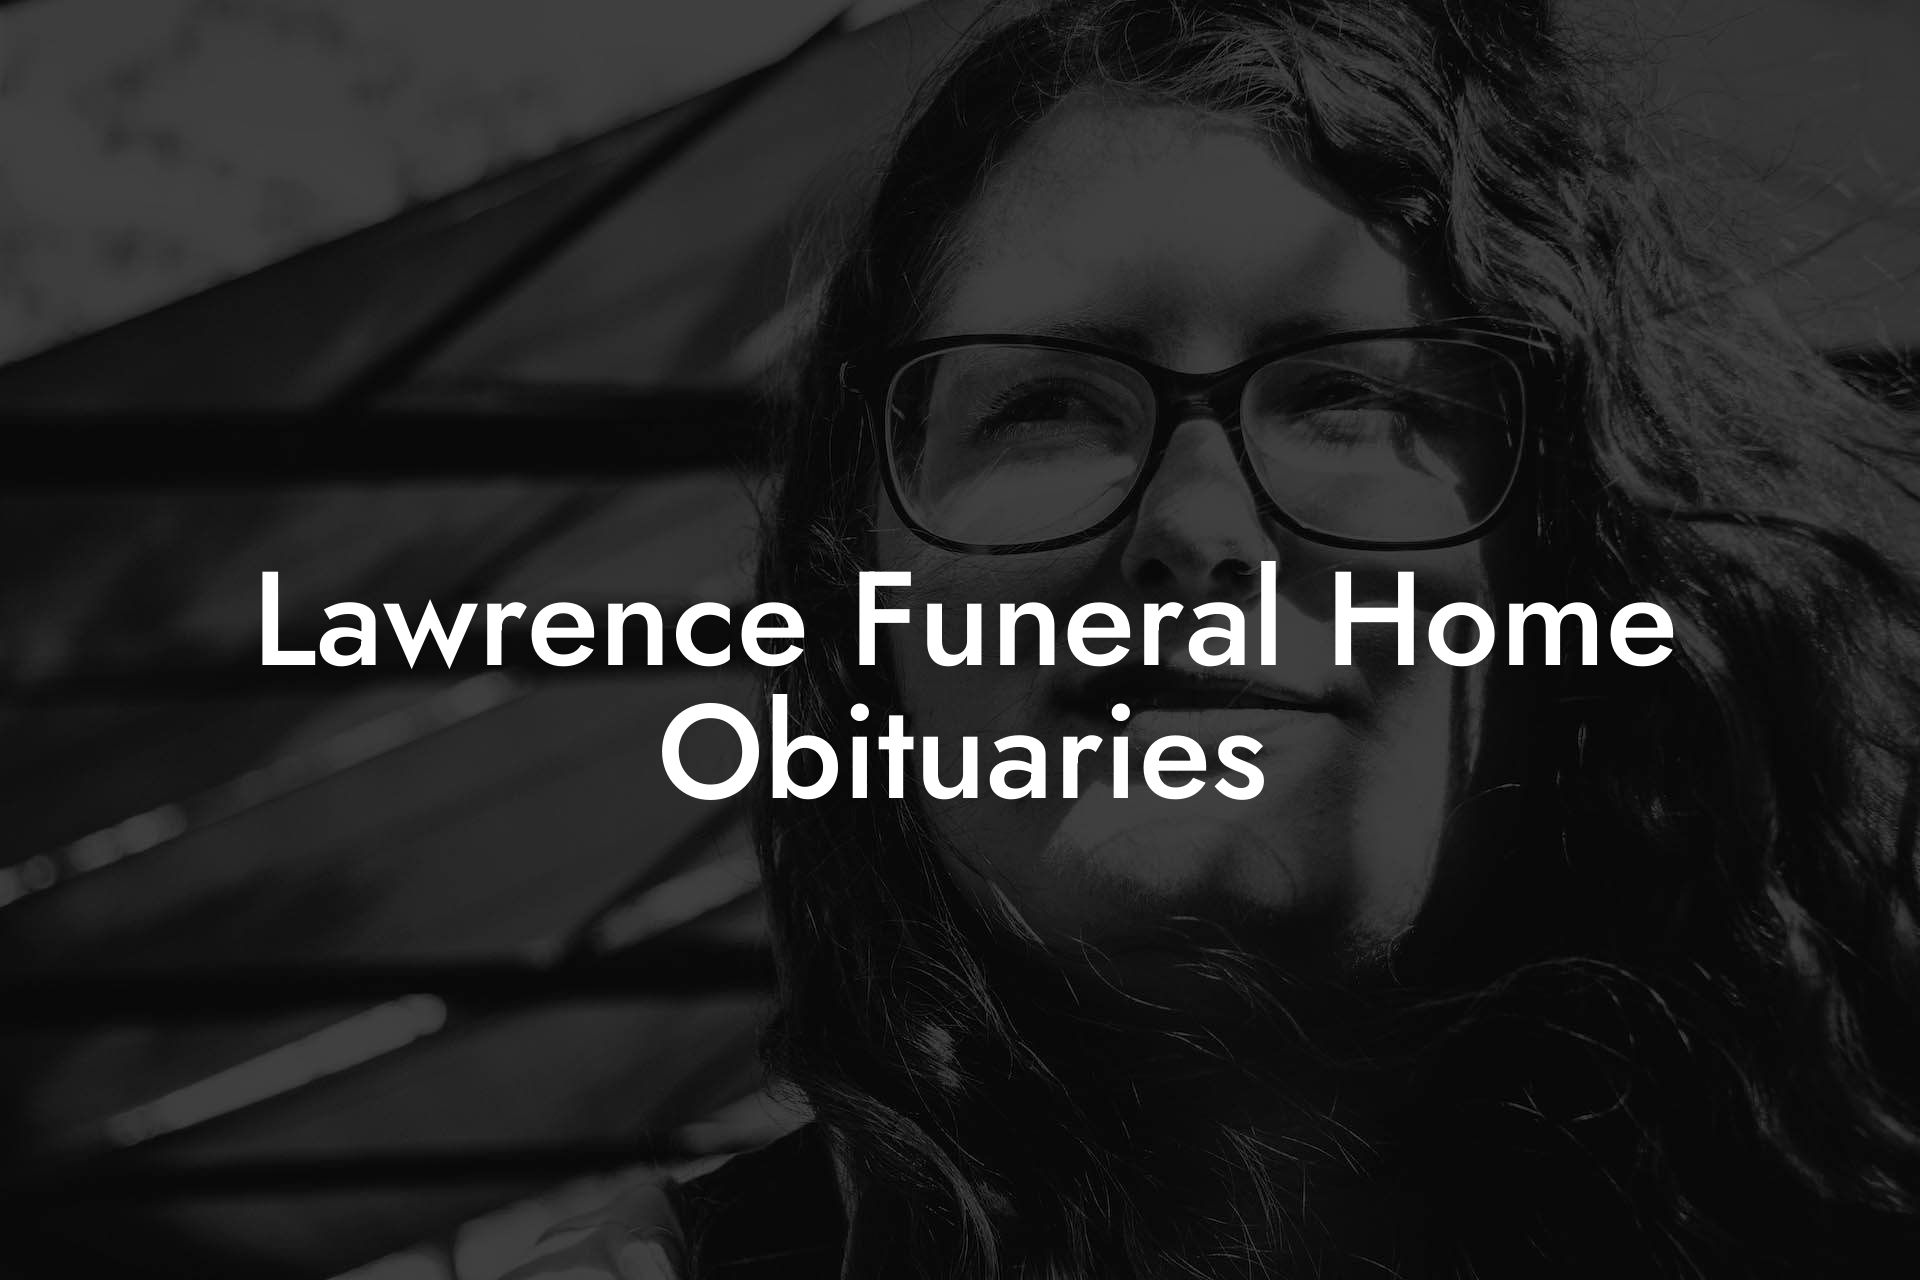 Lawrence Funeral Home Obituaries